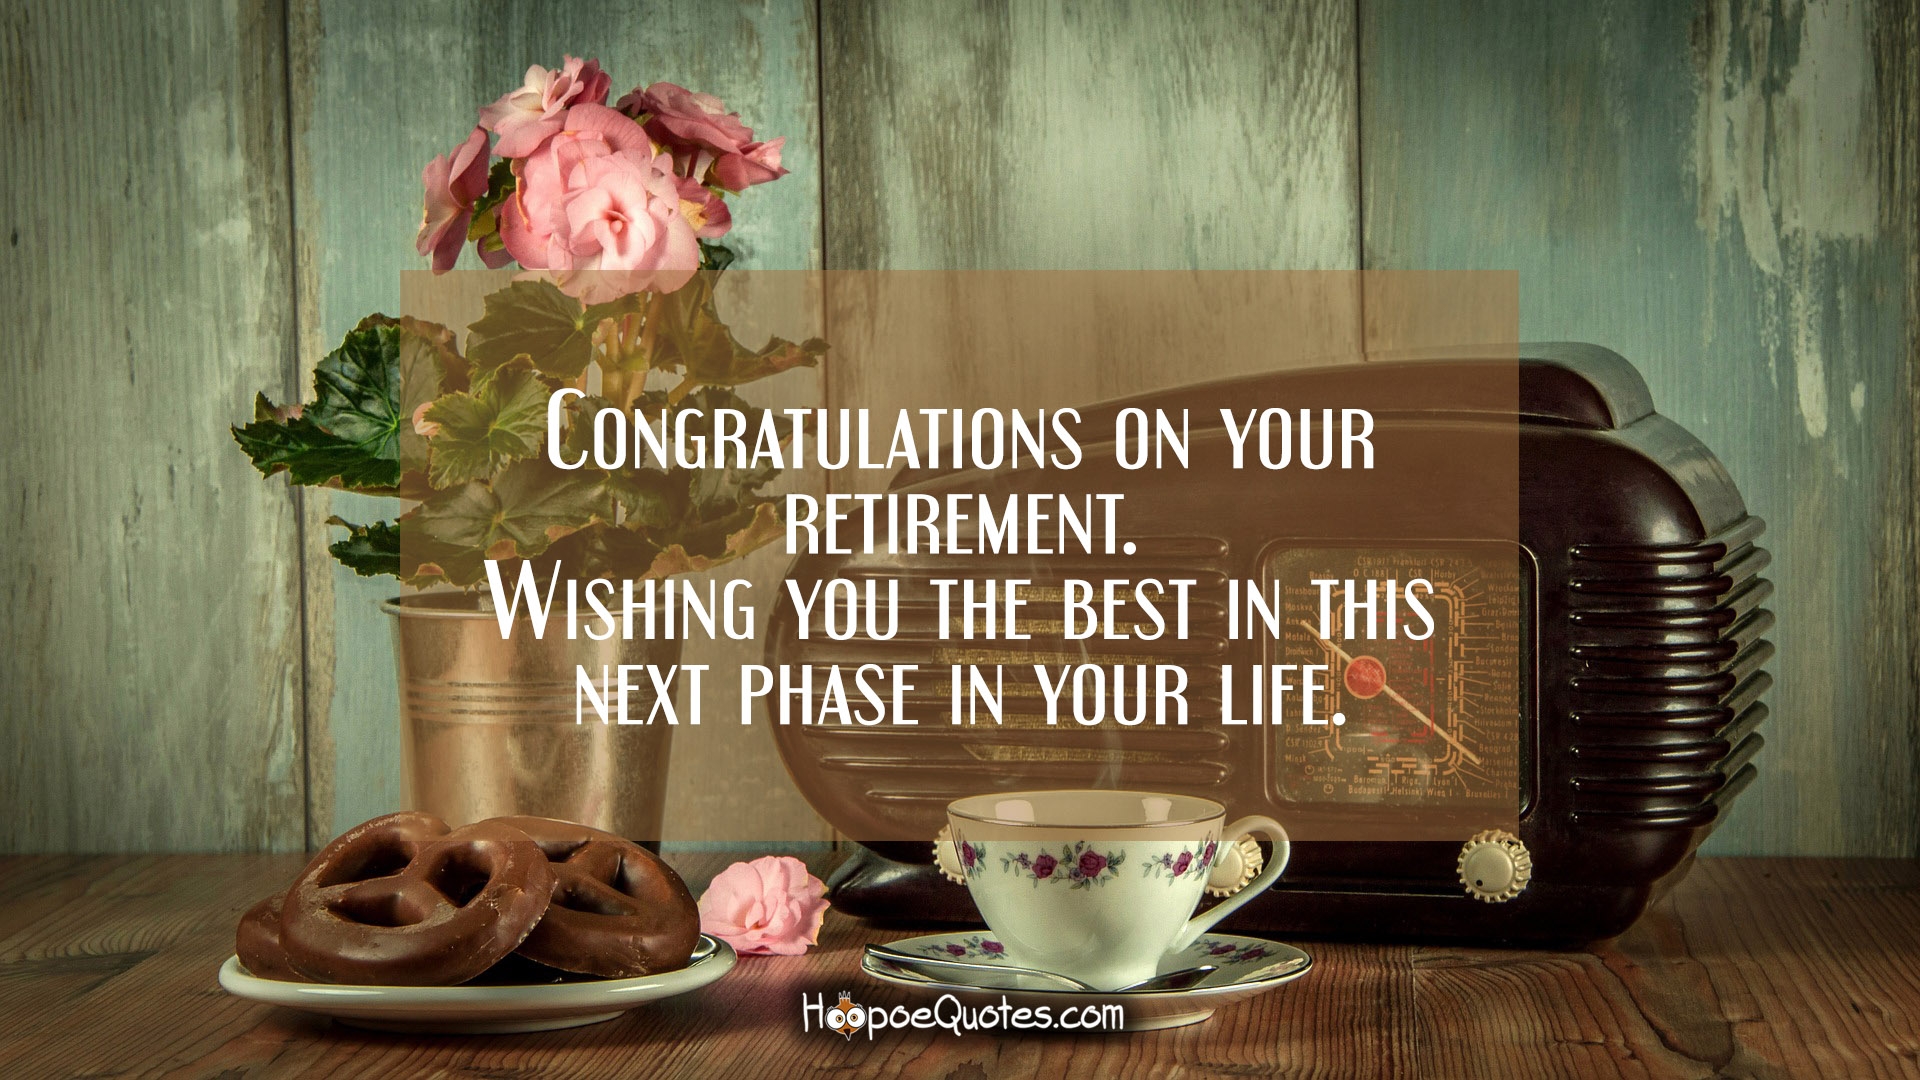 Retirement Wishes , HD Wallpaper & Backgrounds